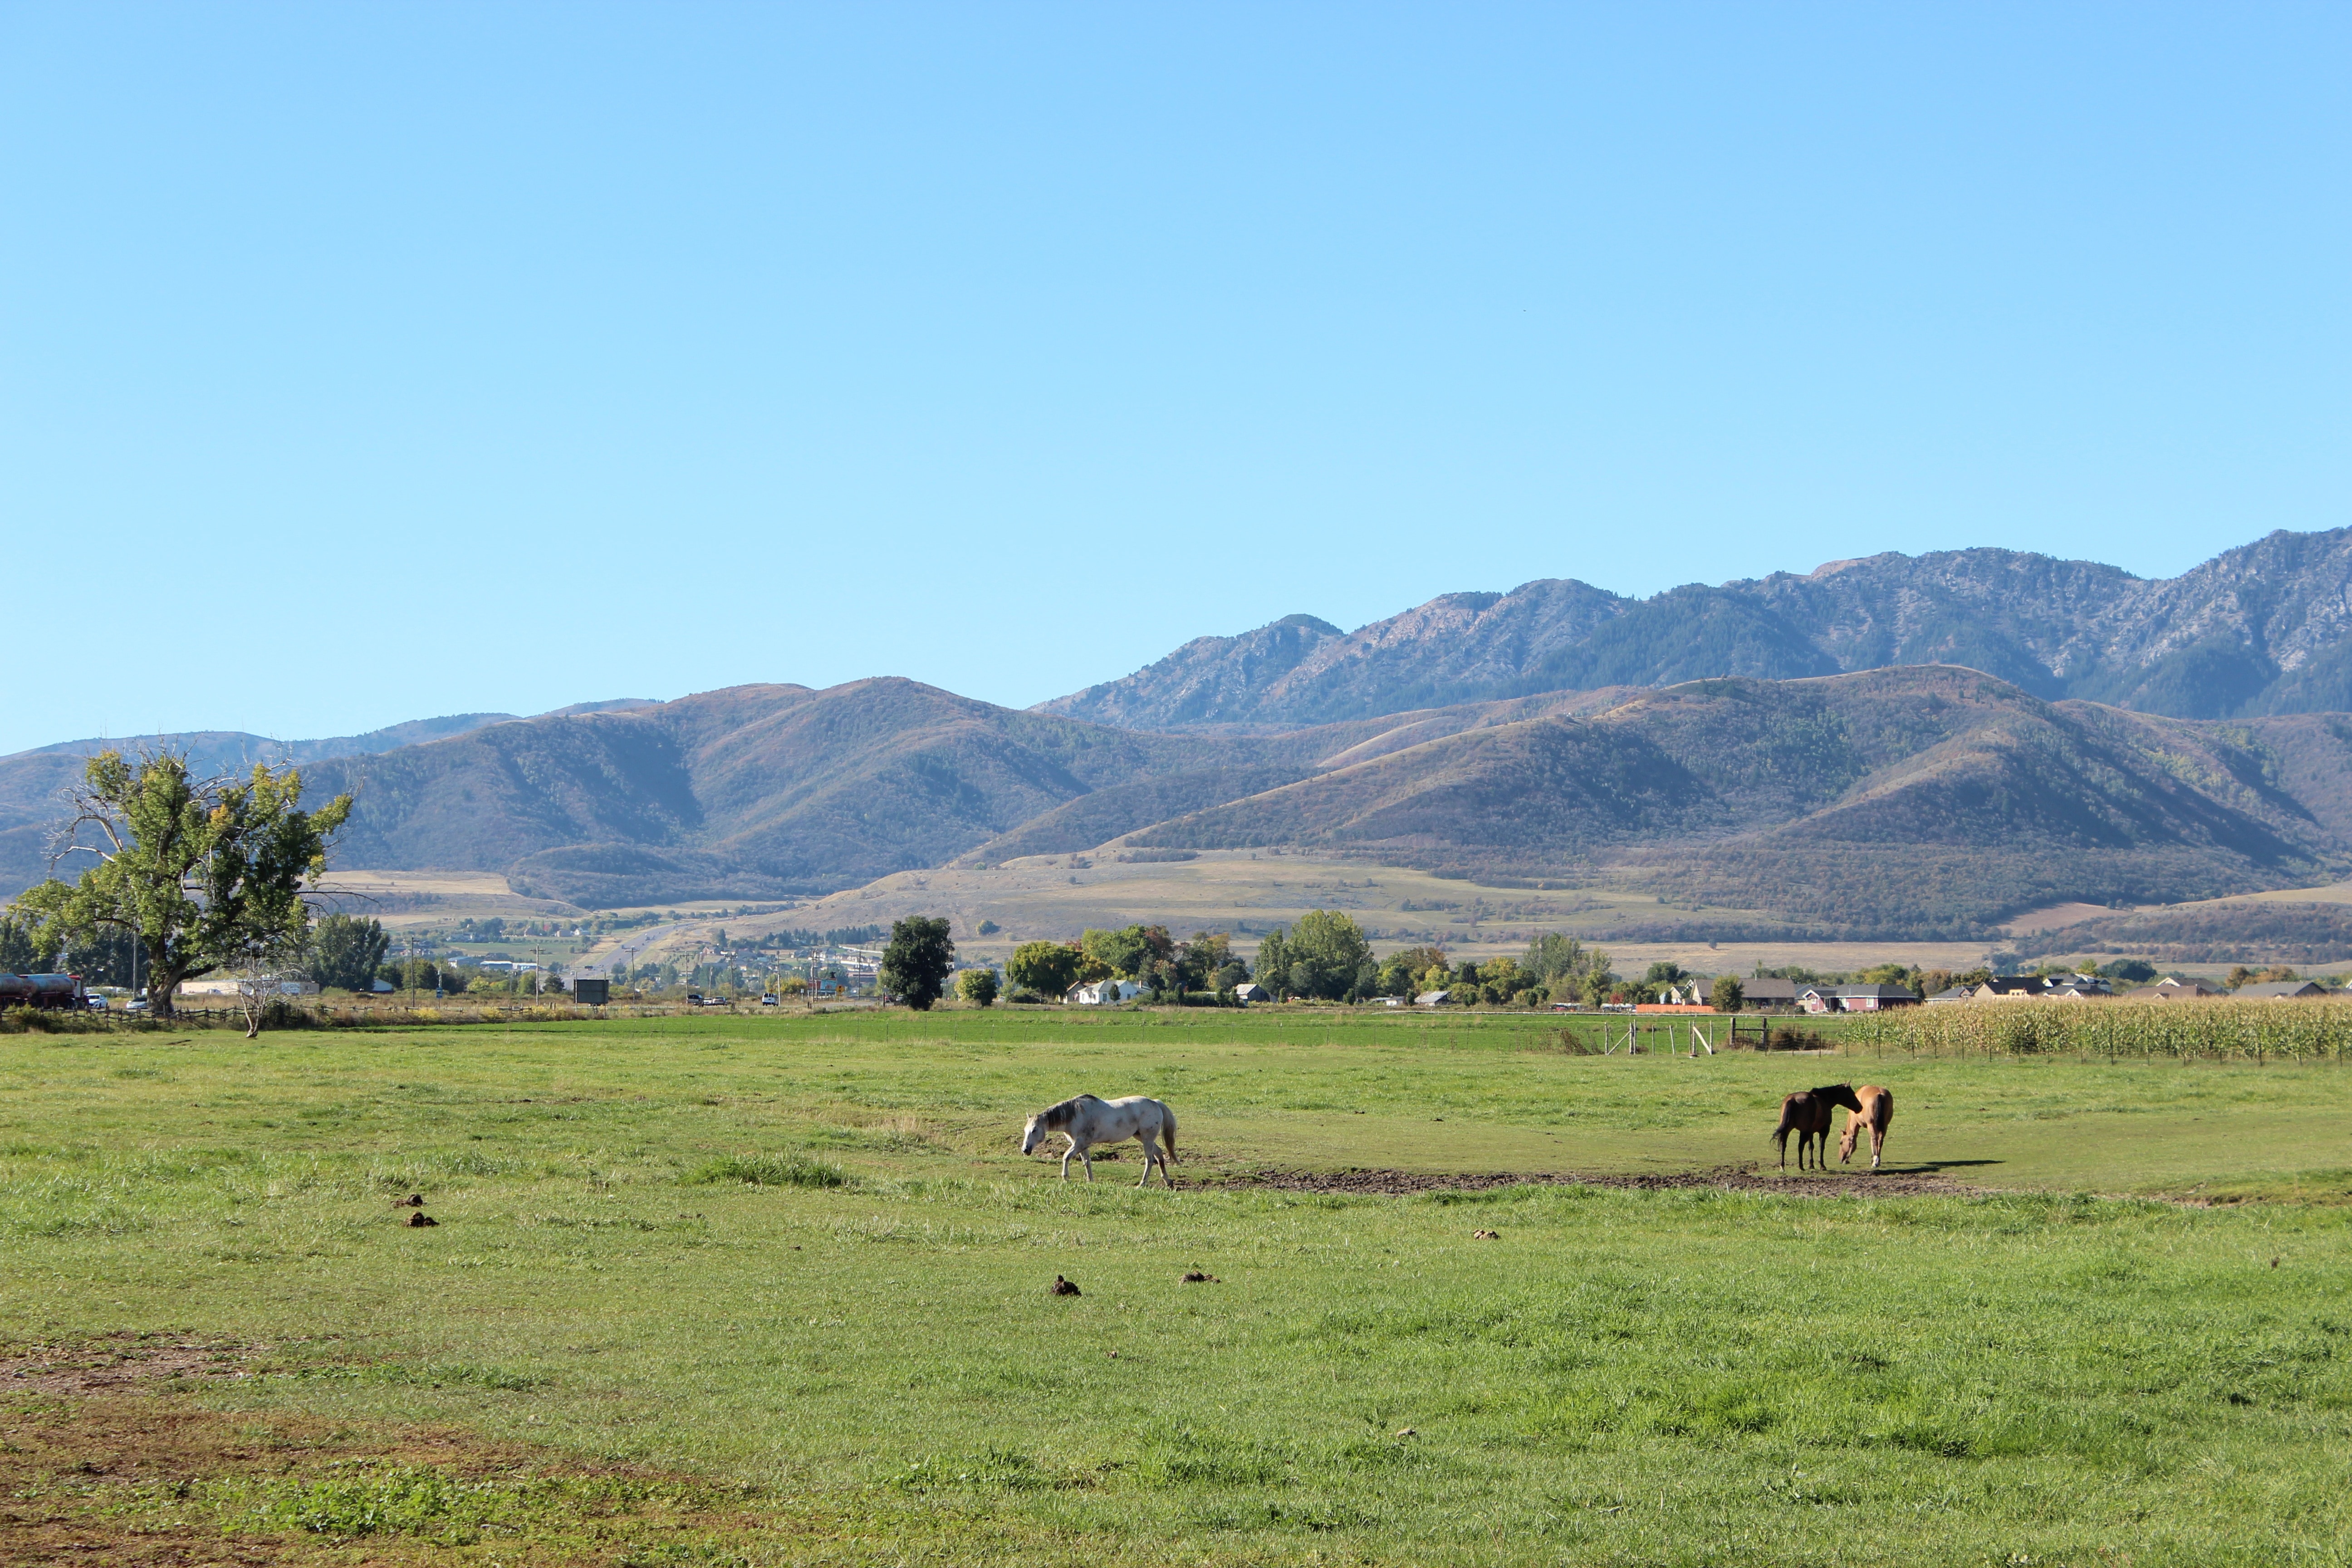 two horses eating grass in grassland near mountains